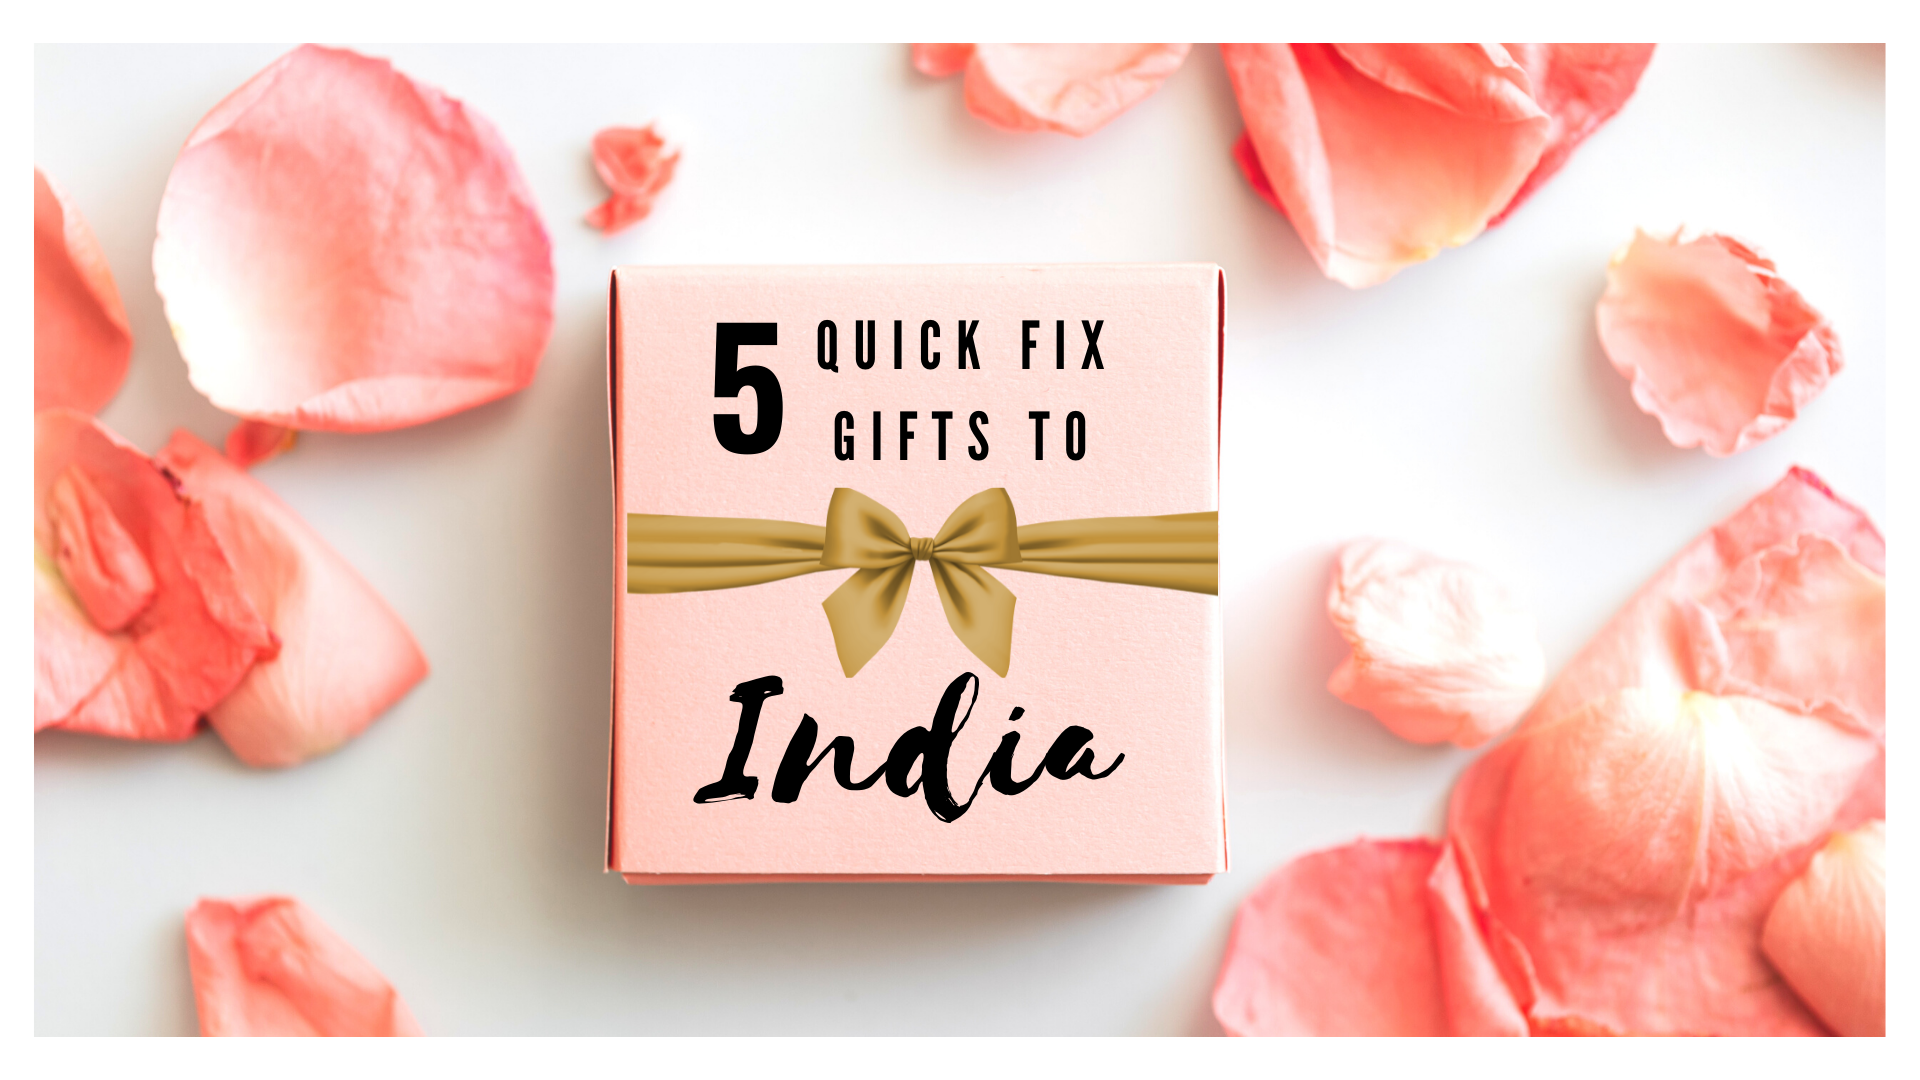 5 QUICK FIX GIFTS TO iNDIA